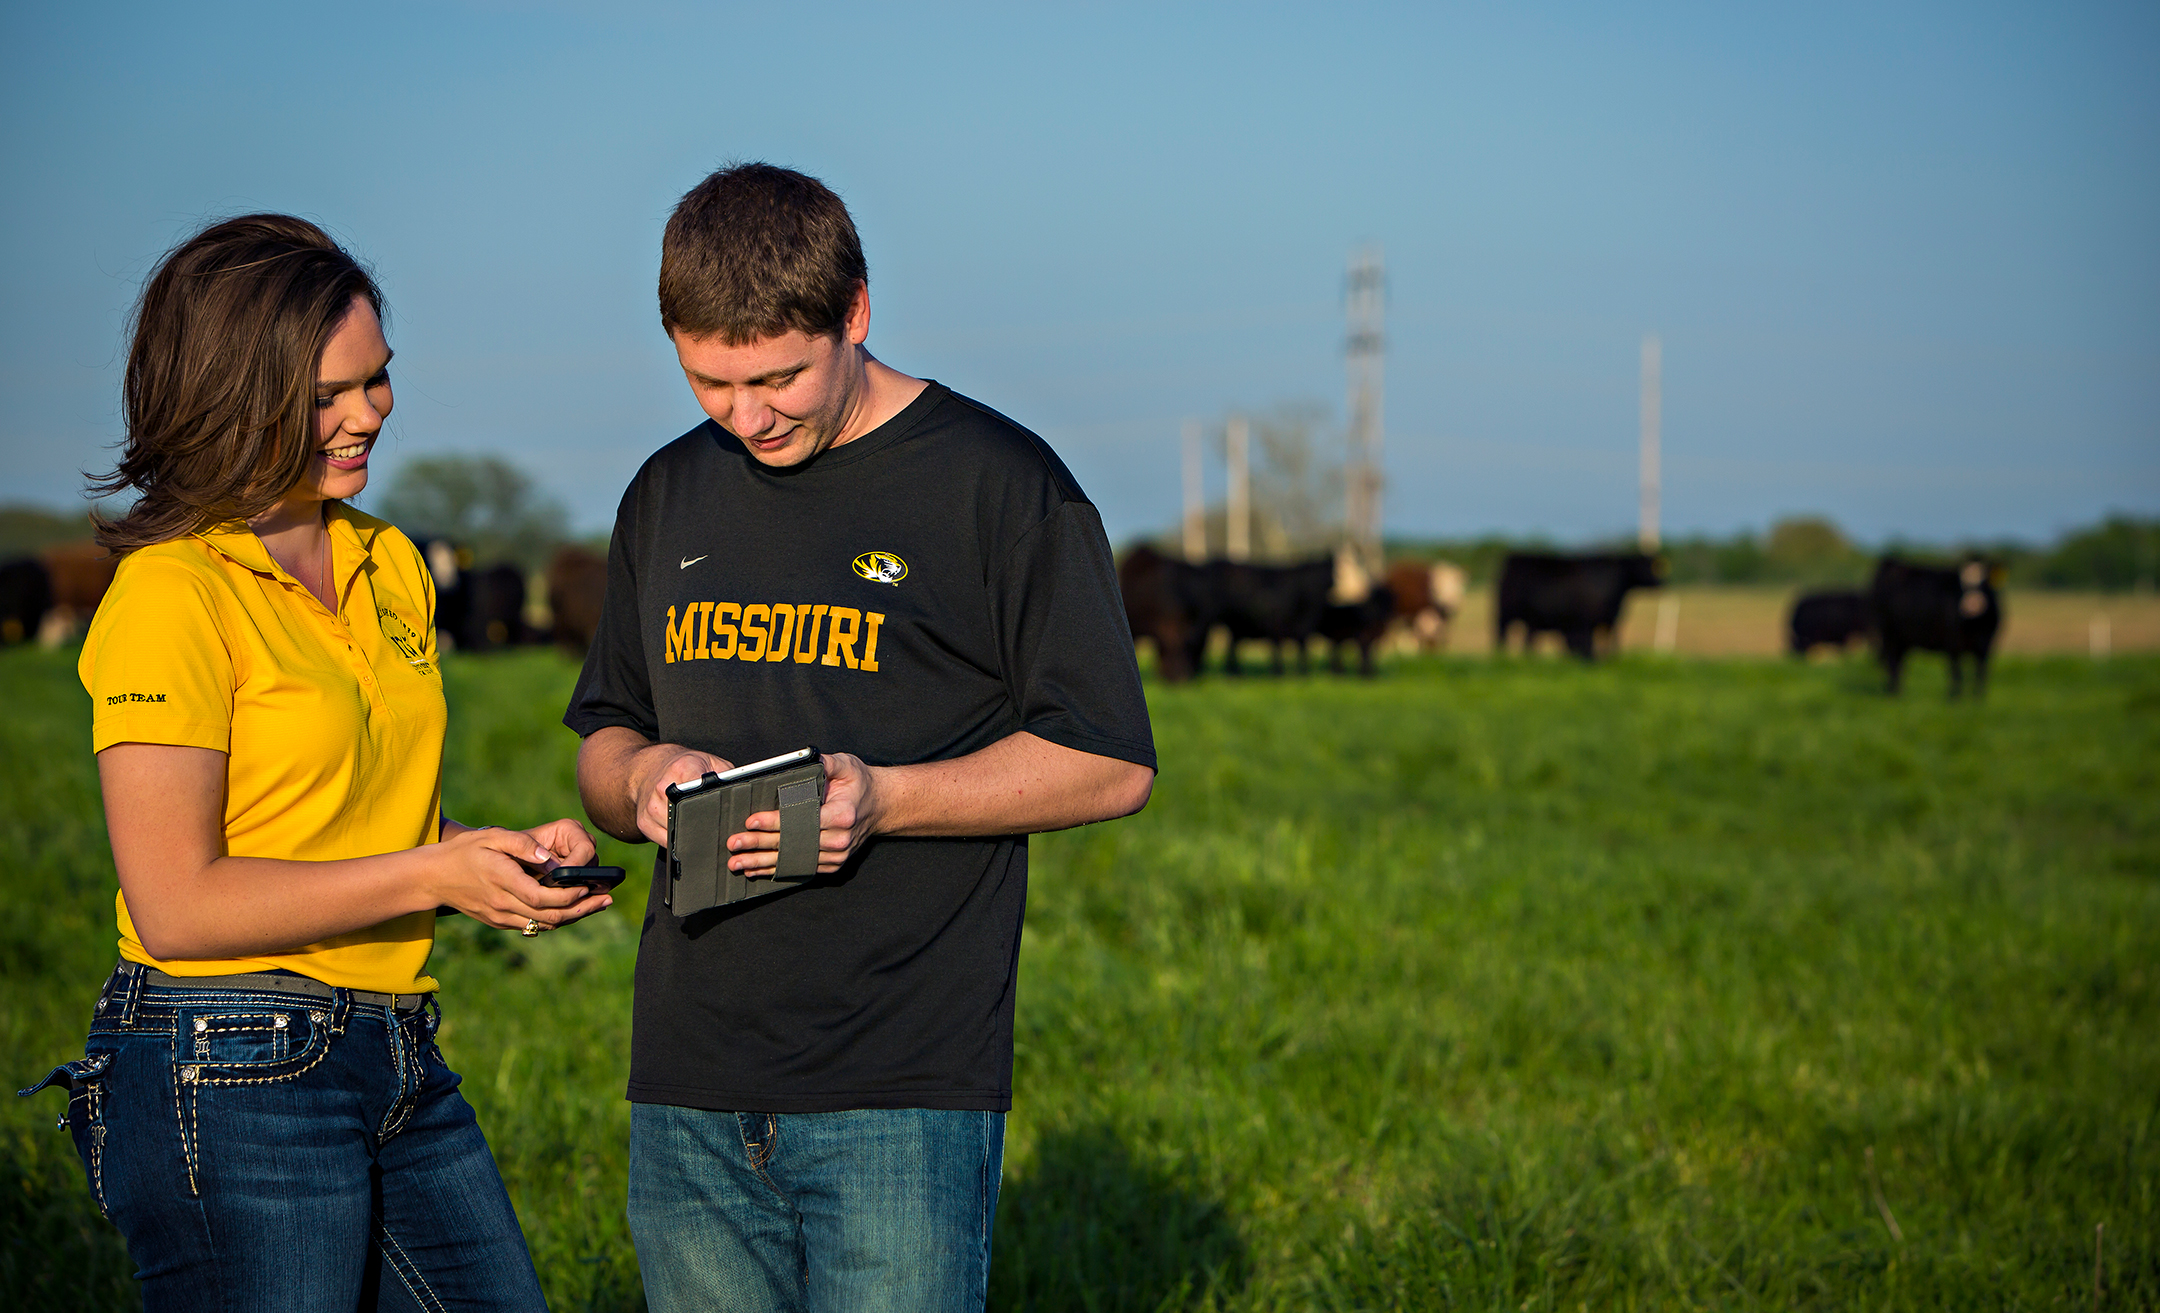 Two students, one female in a yellow polo shirt on the left and the other male in a black t-shirt on the right, smile as they look at a tablet computer. A herd of cows is in the background.